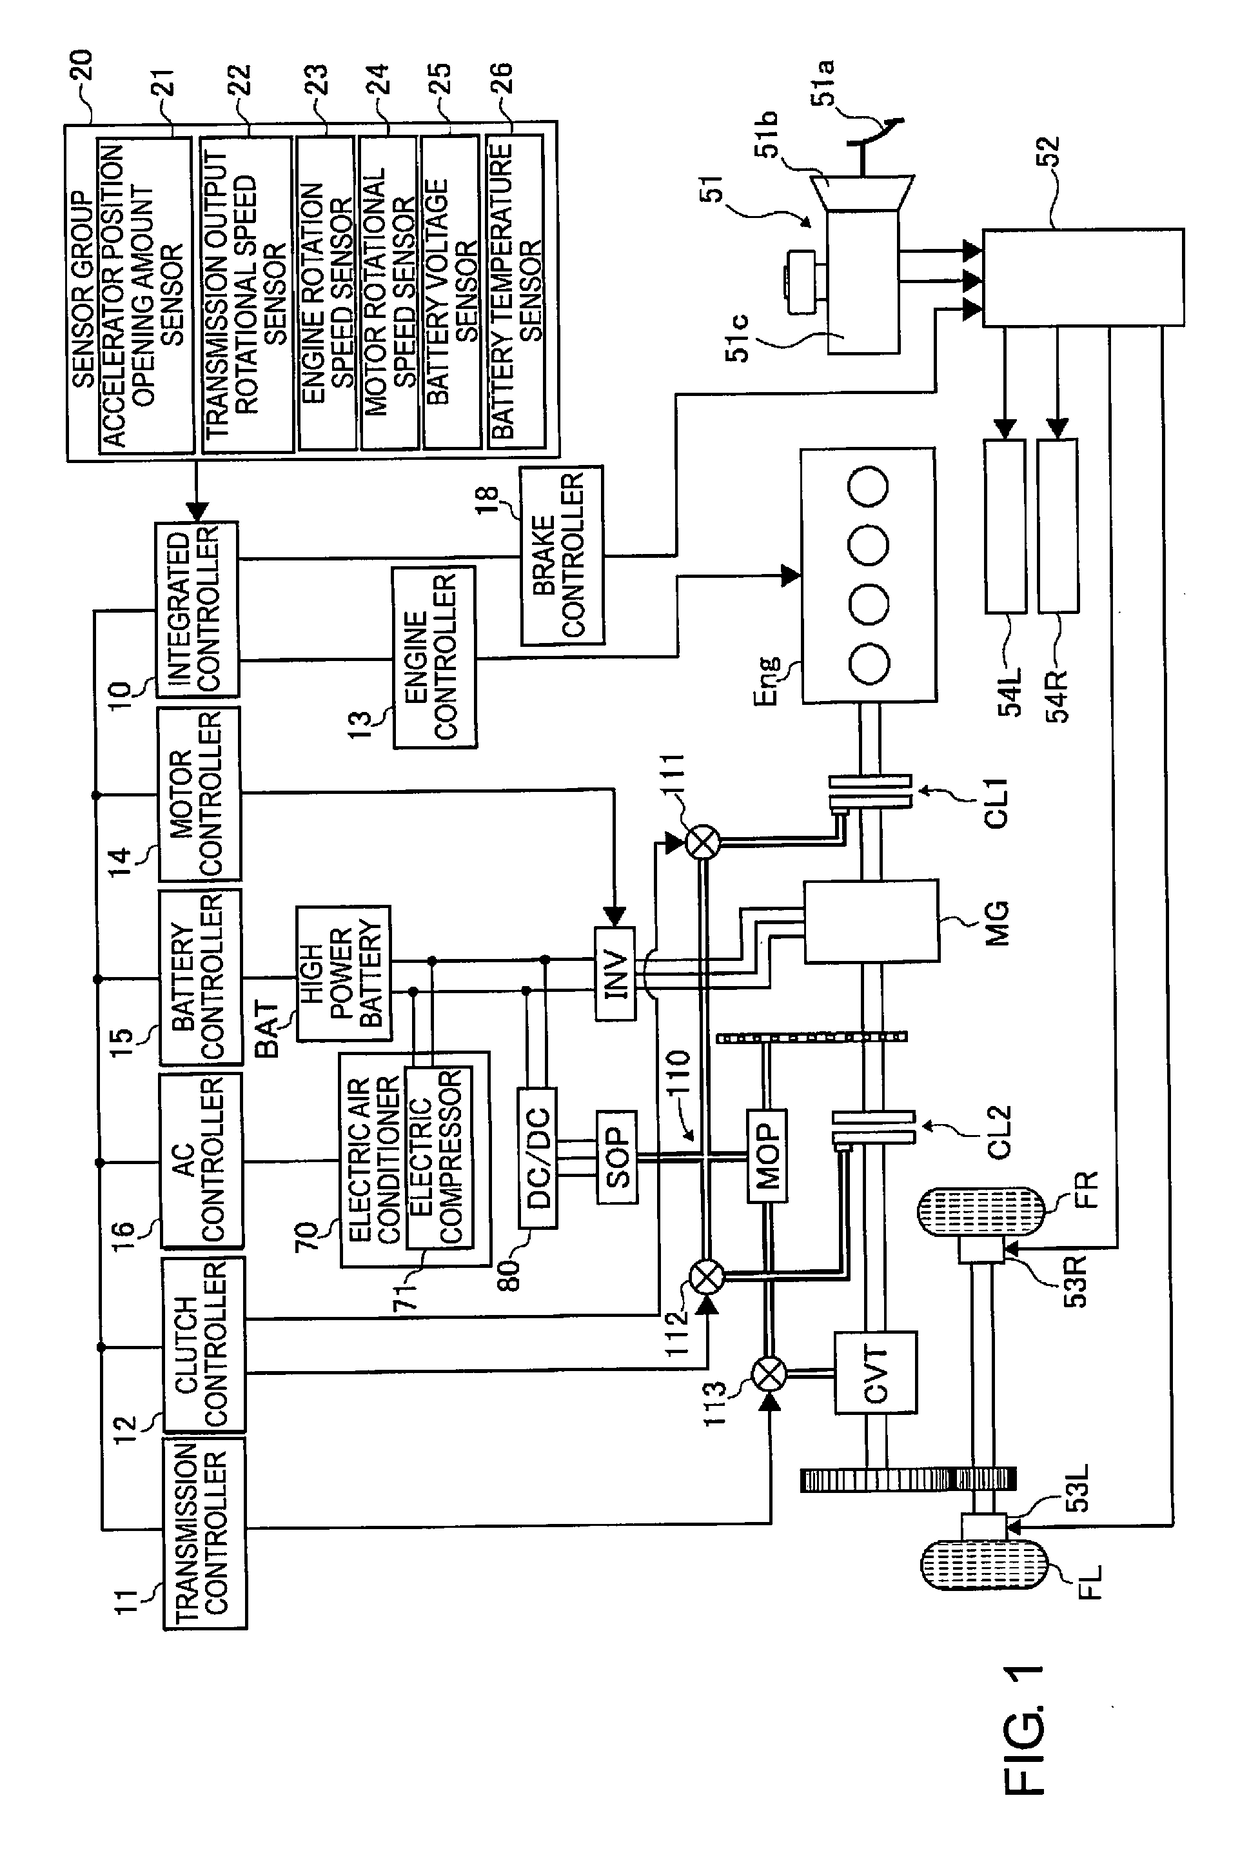 Damping control device for hybrid vehicle